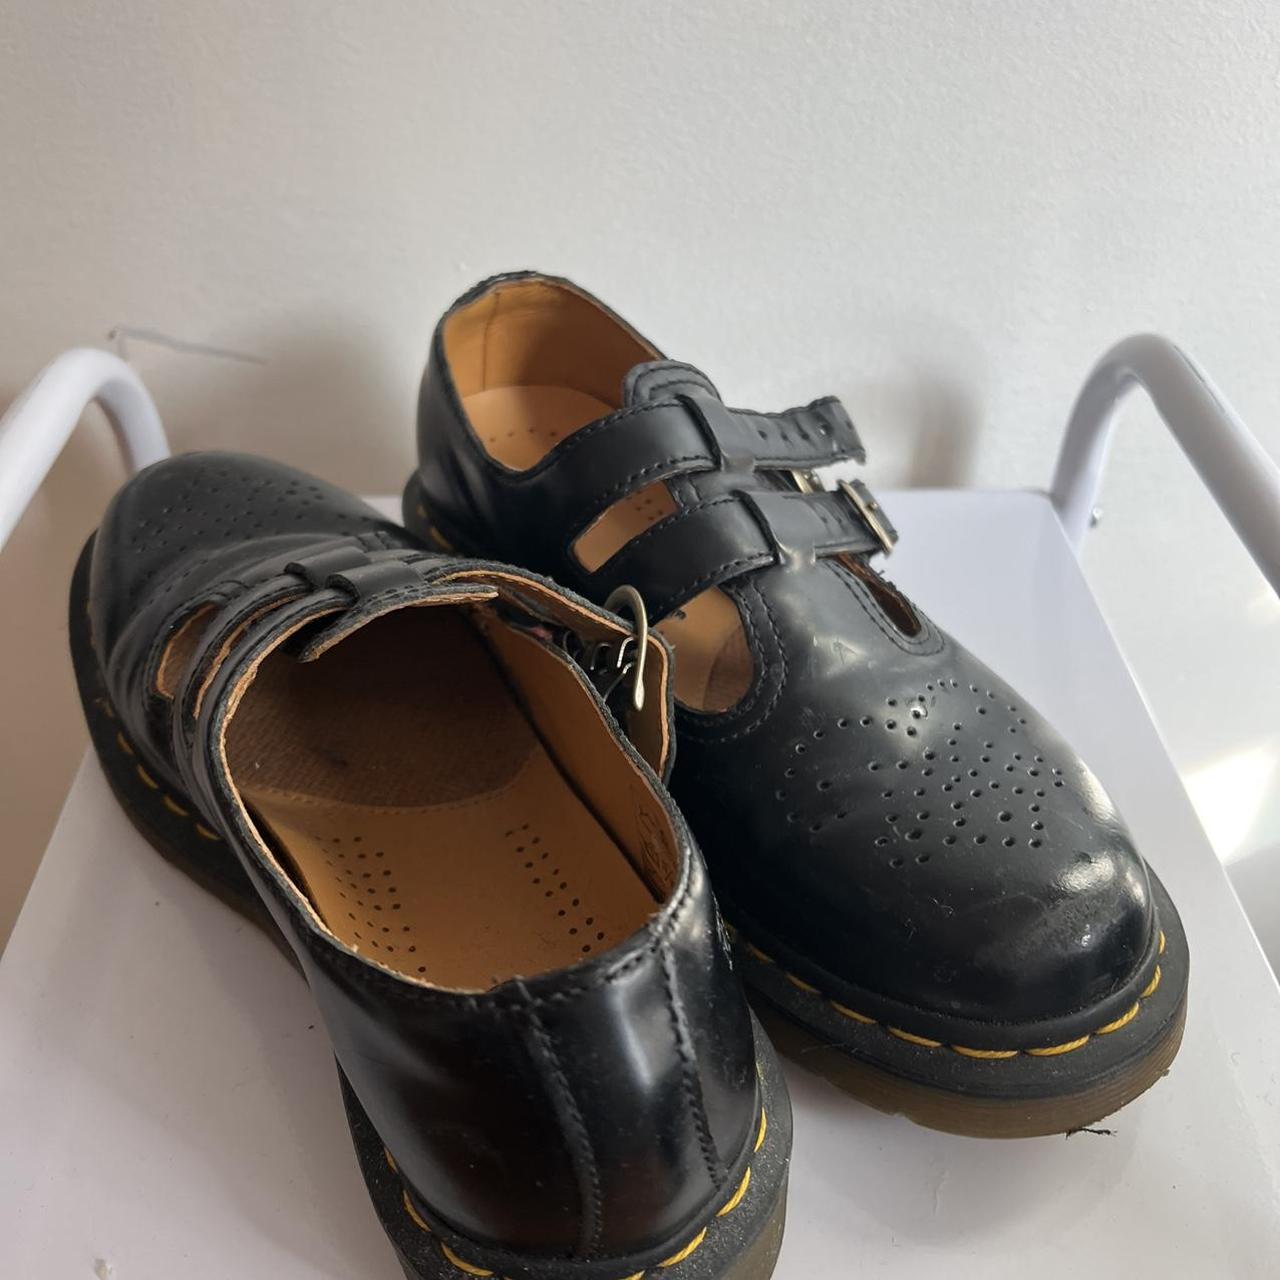 Dr. Martens Women's Loafers (3)